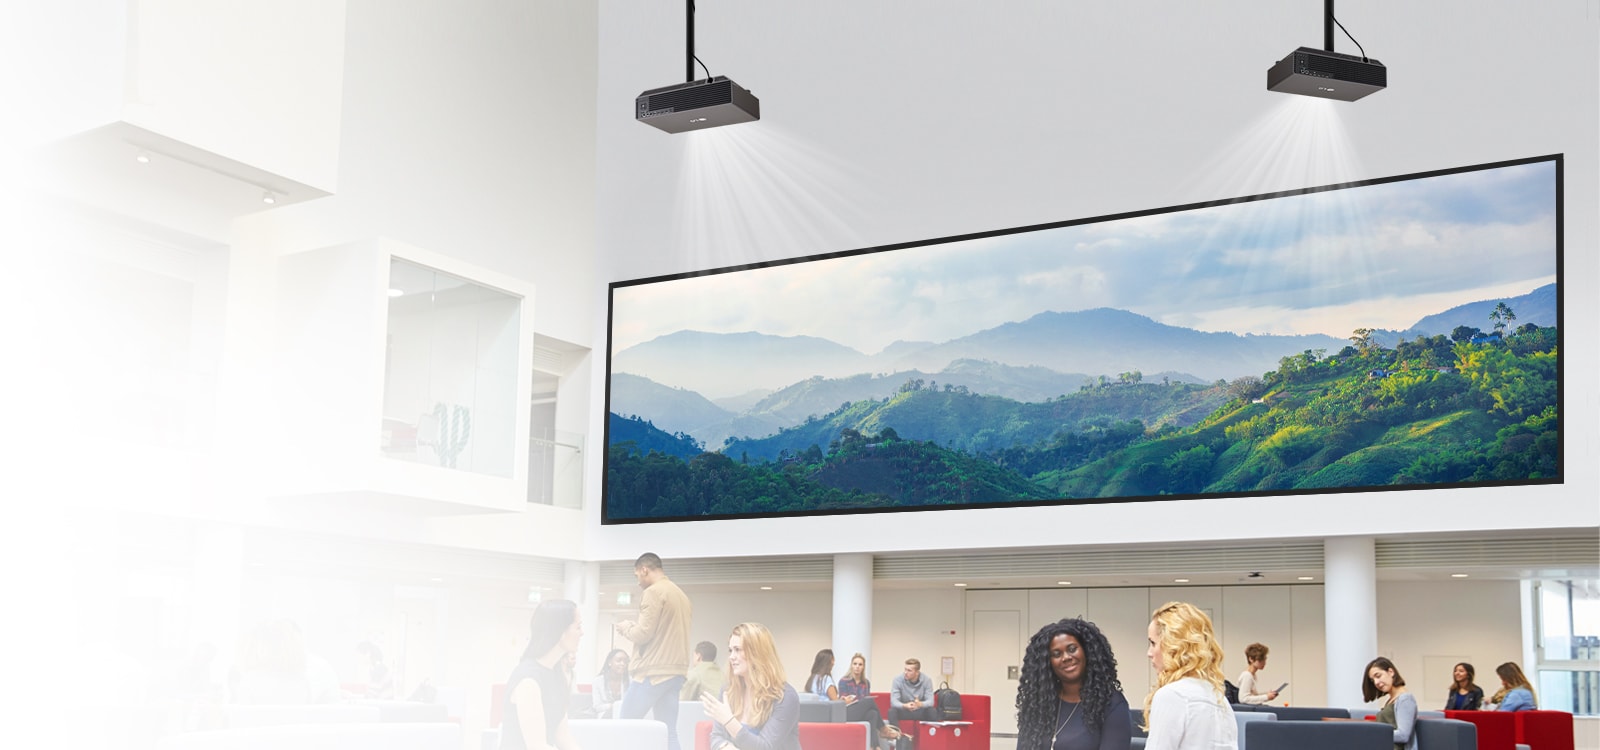 Thanks to the 7,000 ANSI Lumens brightness, LG BU70QGA can produce clear picture quality even in bright indoor environments such as building lobbies.